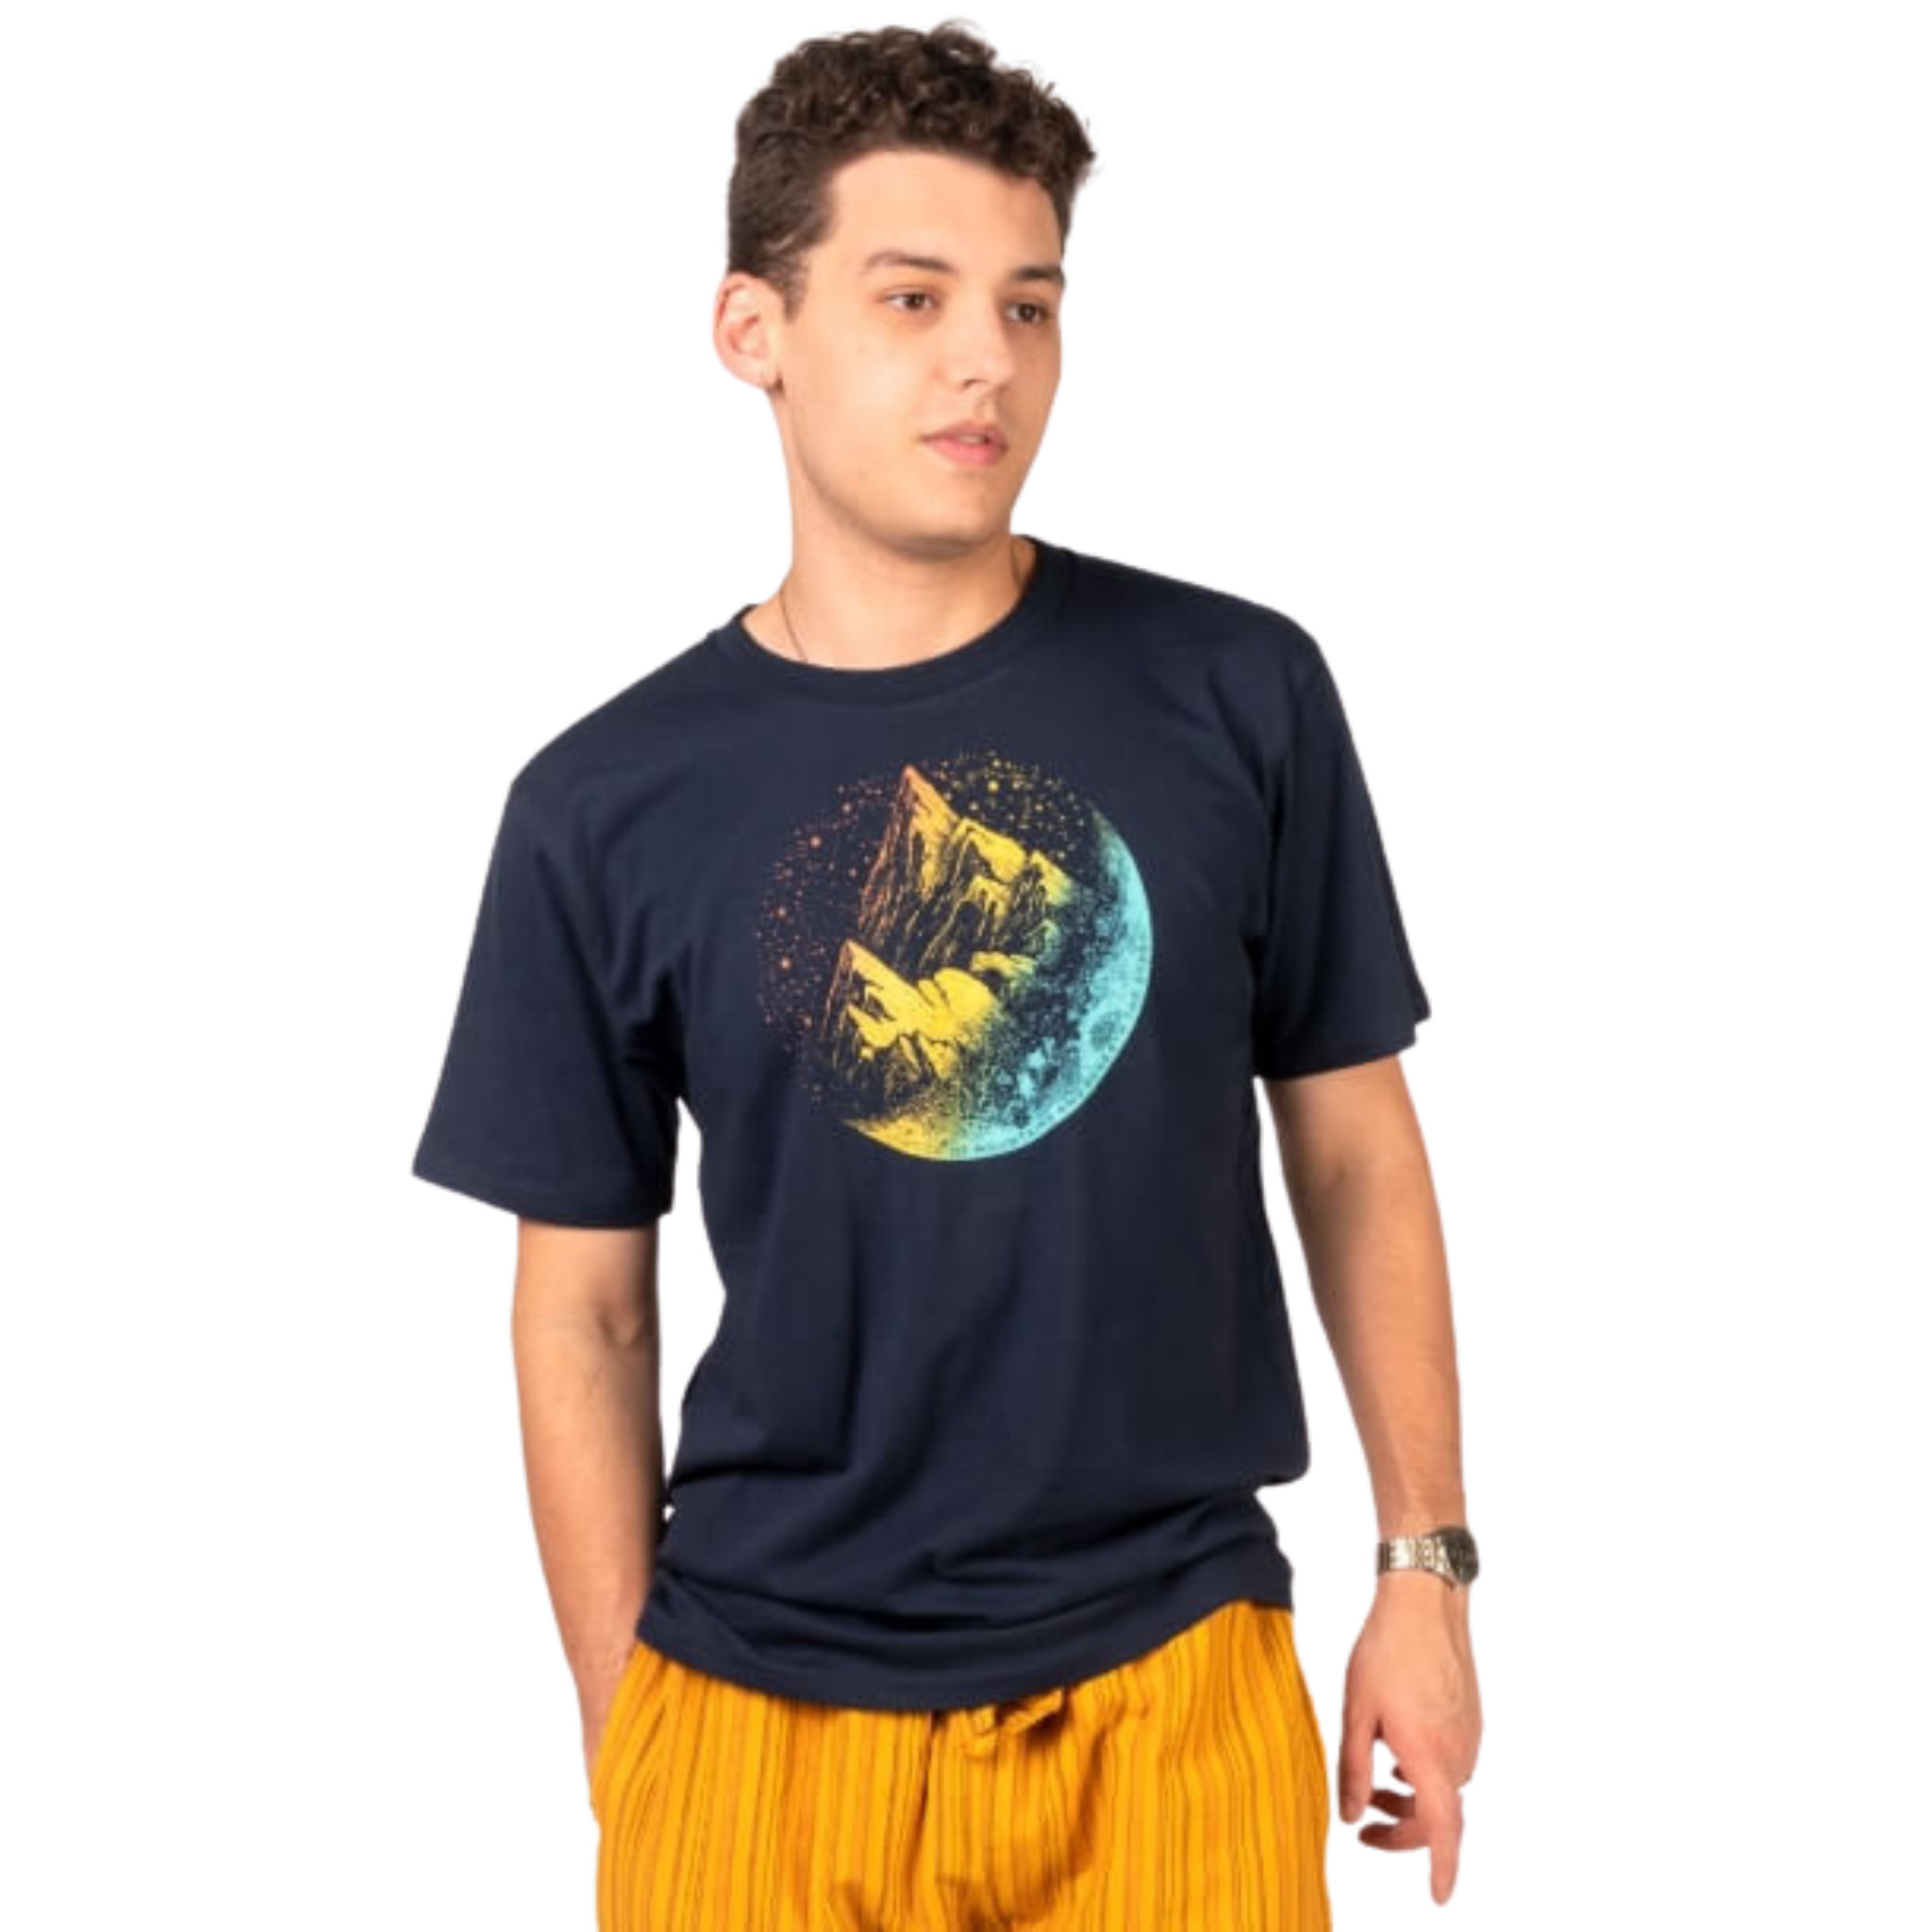 Mountains of the Moon Organic T-Shirt